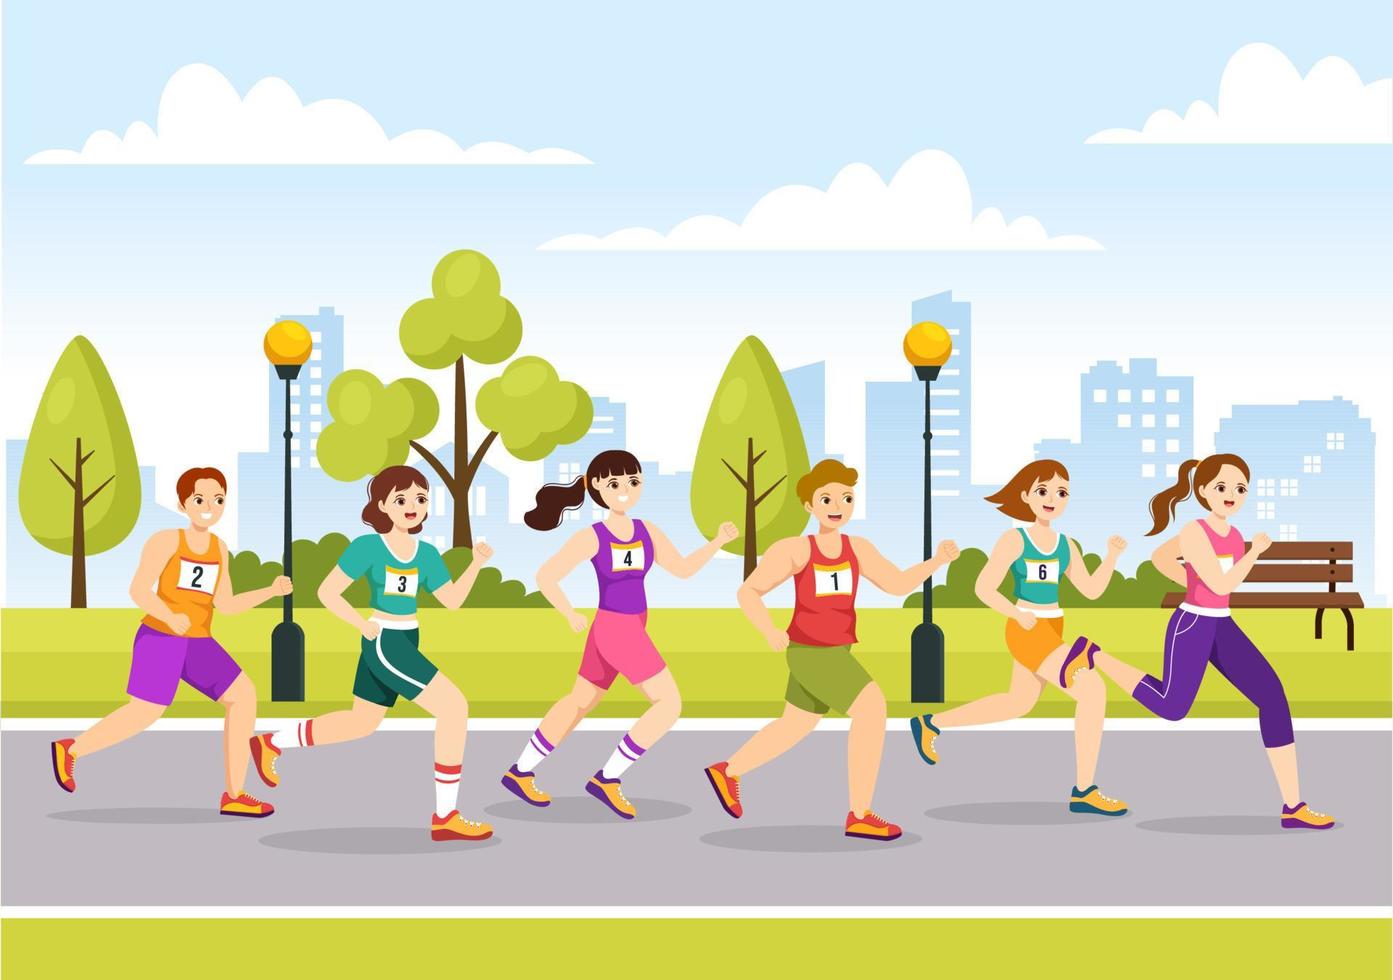 Marathon Race Illustration with People Running, Jogging Sport Tournament and Run to Reach the Finish Line in Flat Cartoon Hand Drawn Template vector